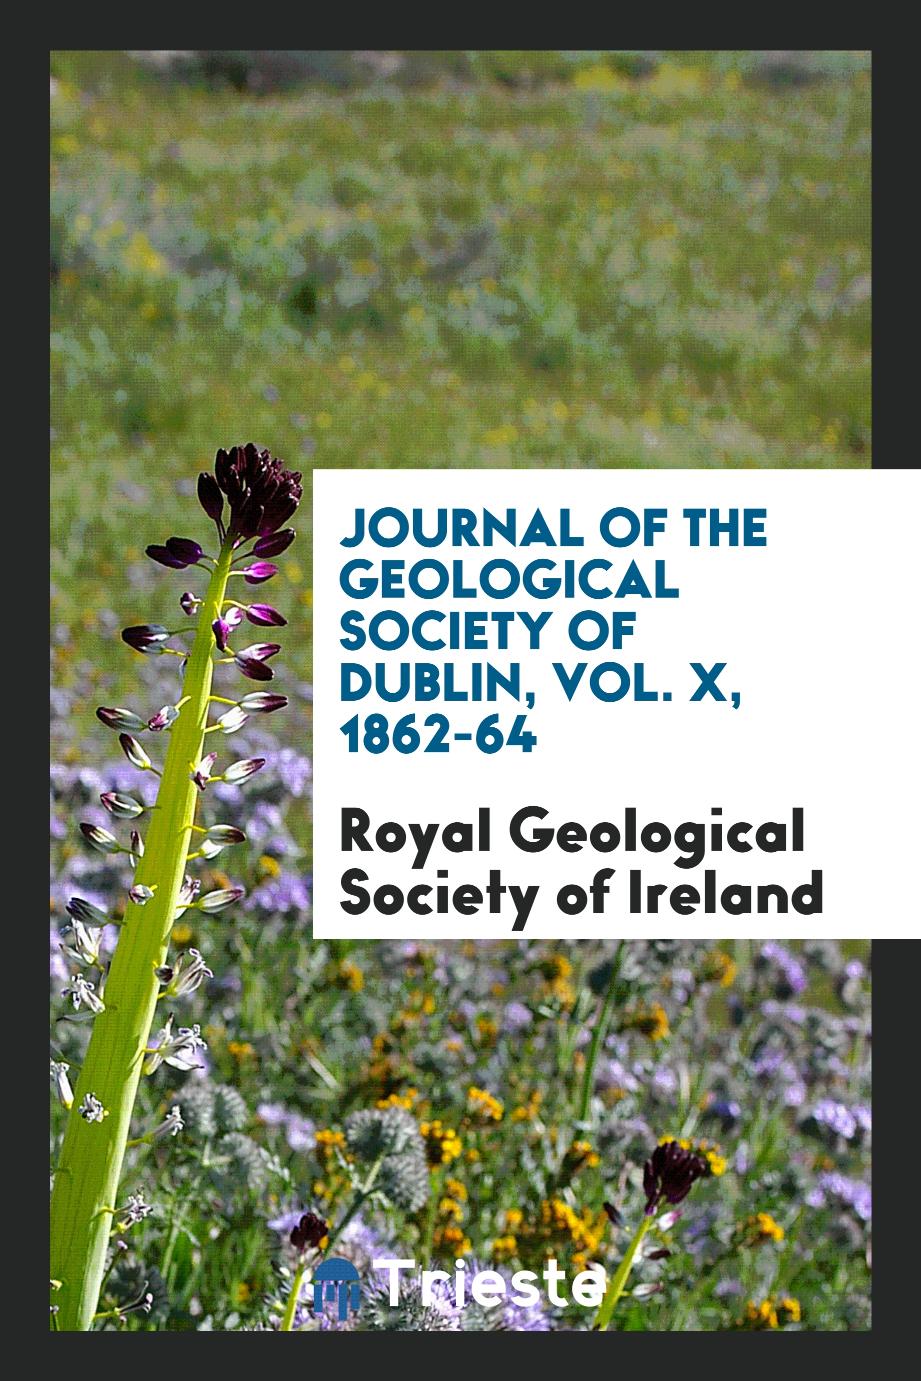 Journal of the Geological Society of Dublin, Vol. X, 1862-64